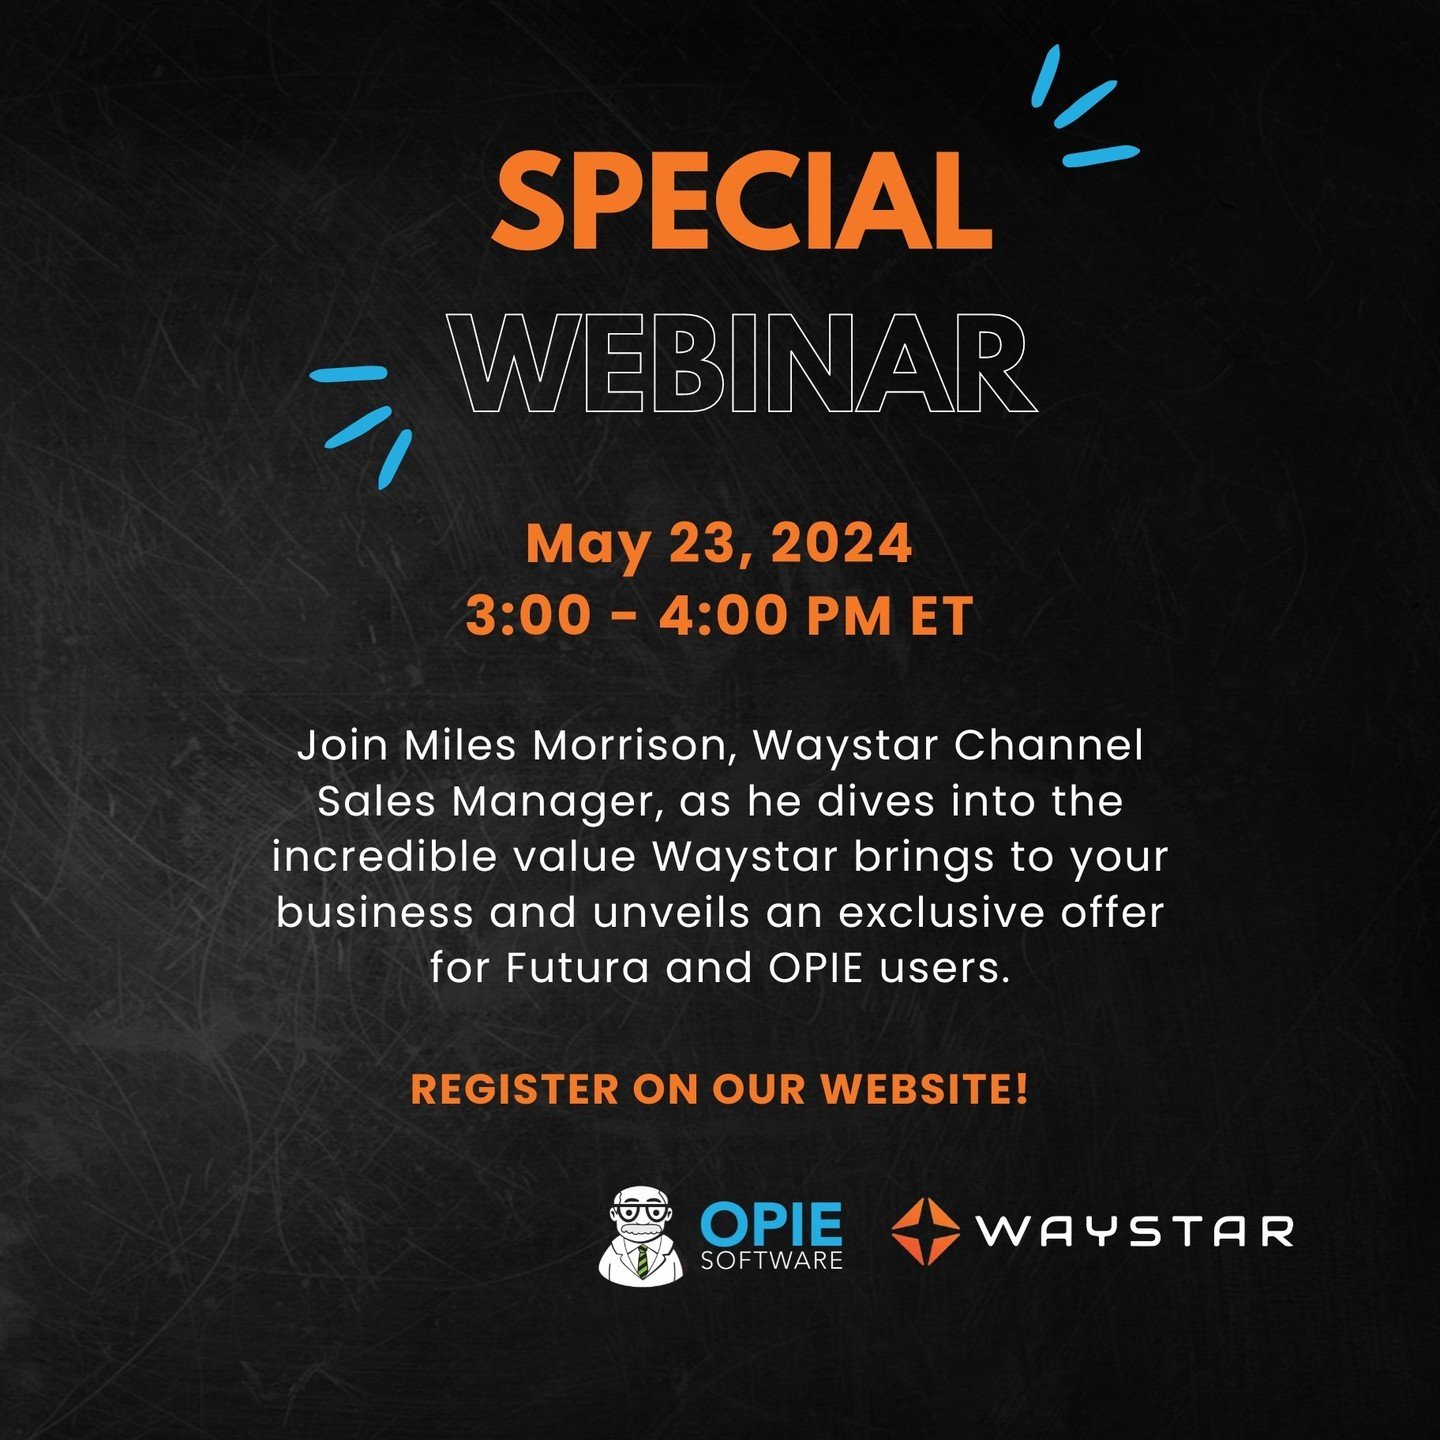 🎉 Special Offer Alert from Waystar! 🎉

Join Miles Morrison, Waystar Channel Sales Manager, tomorrow, May 23 as he dives into the incredible value Waystar brings to your business and unveils an exclusive offer for Futura and OPIE users.

✨ Discover 